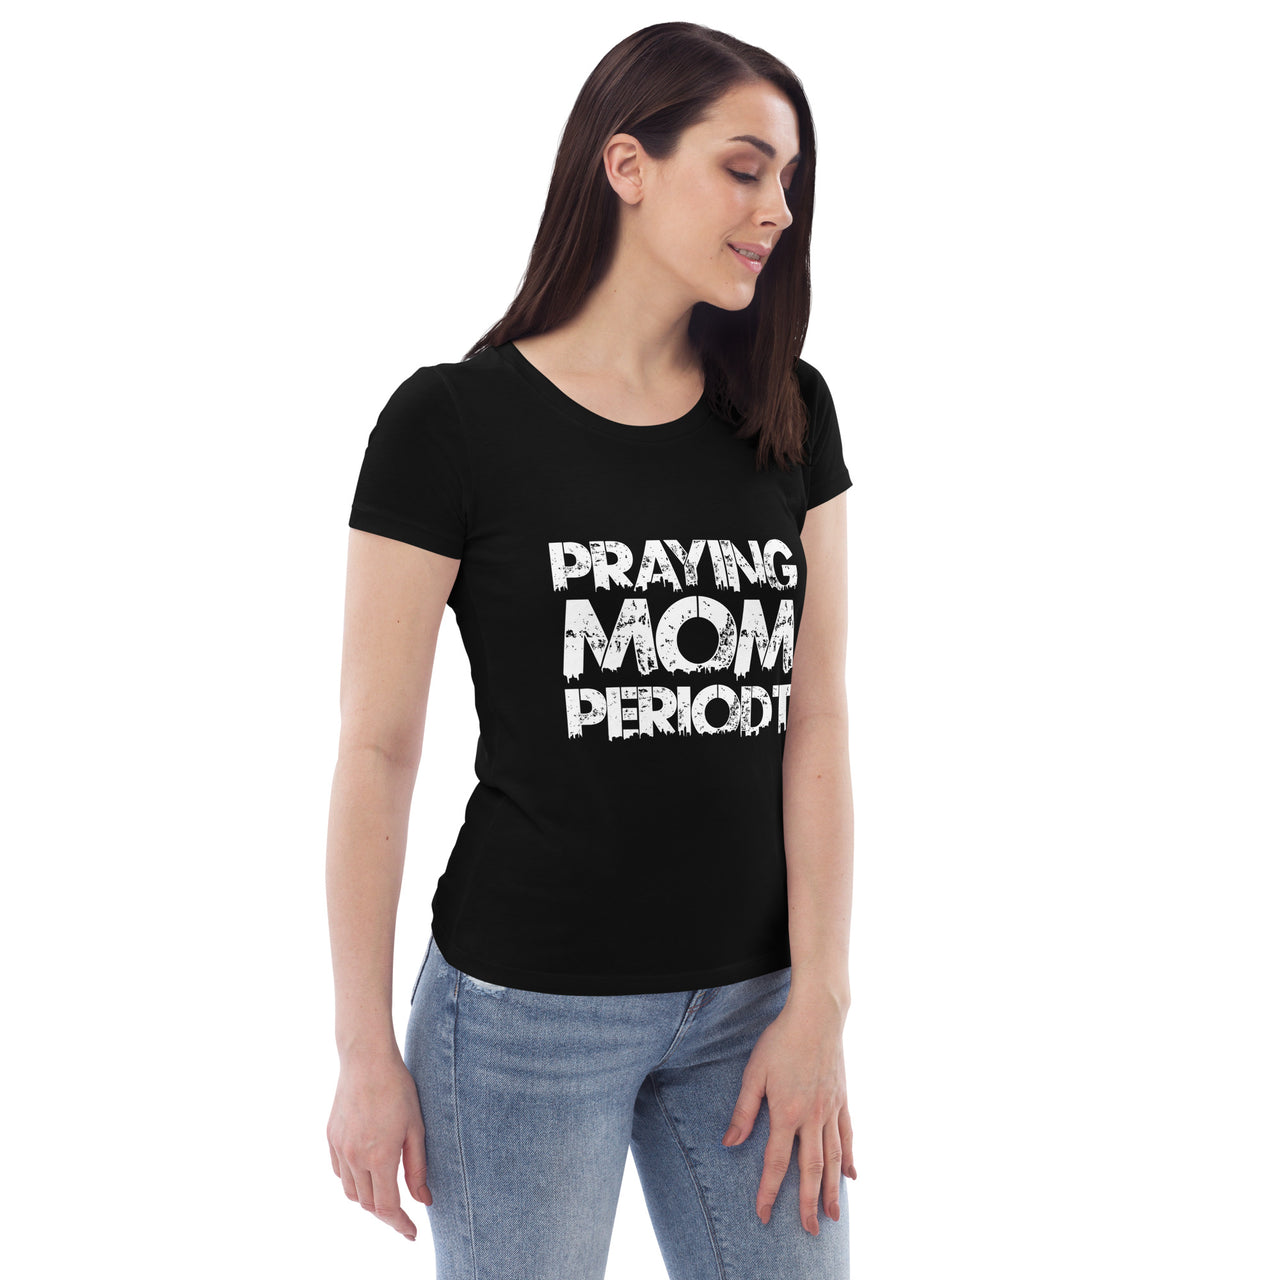 [Praying Mom Periodt] White Font Women's Fitted T-Shirts